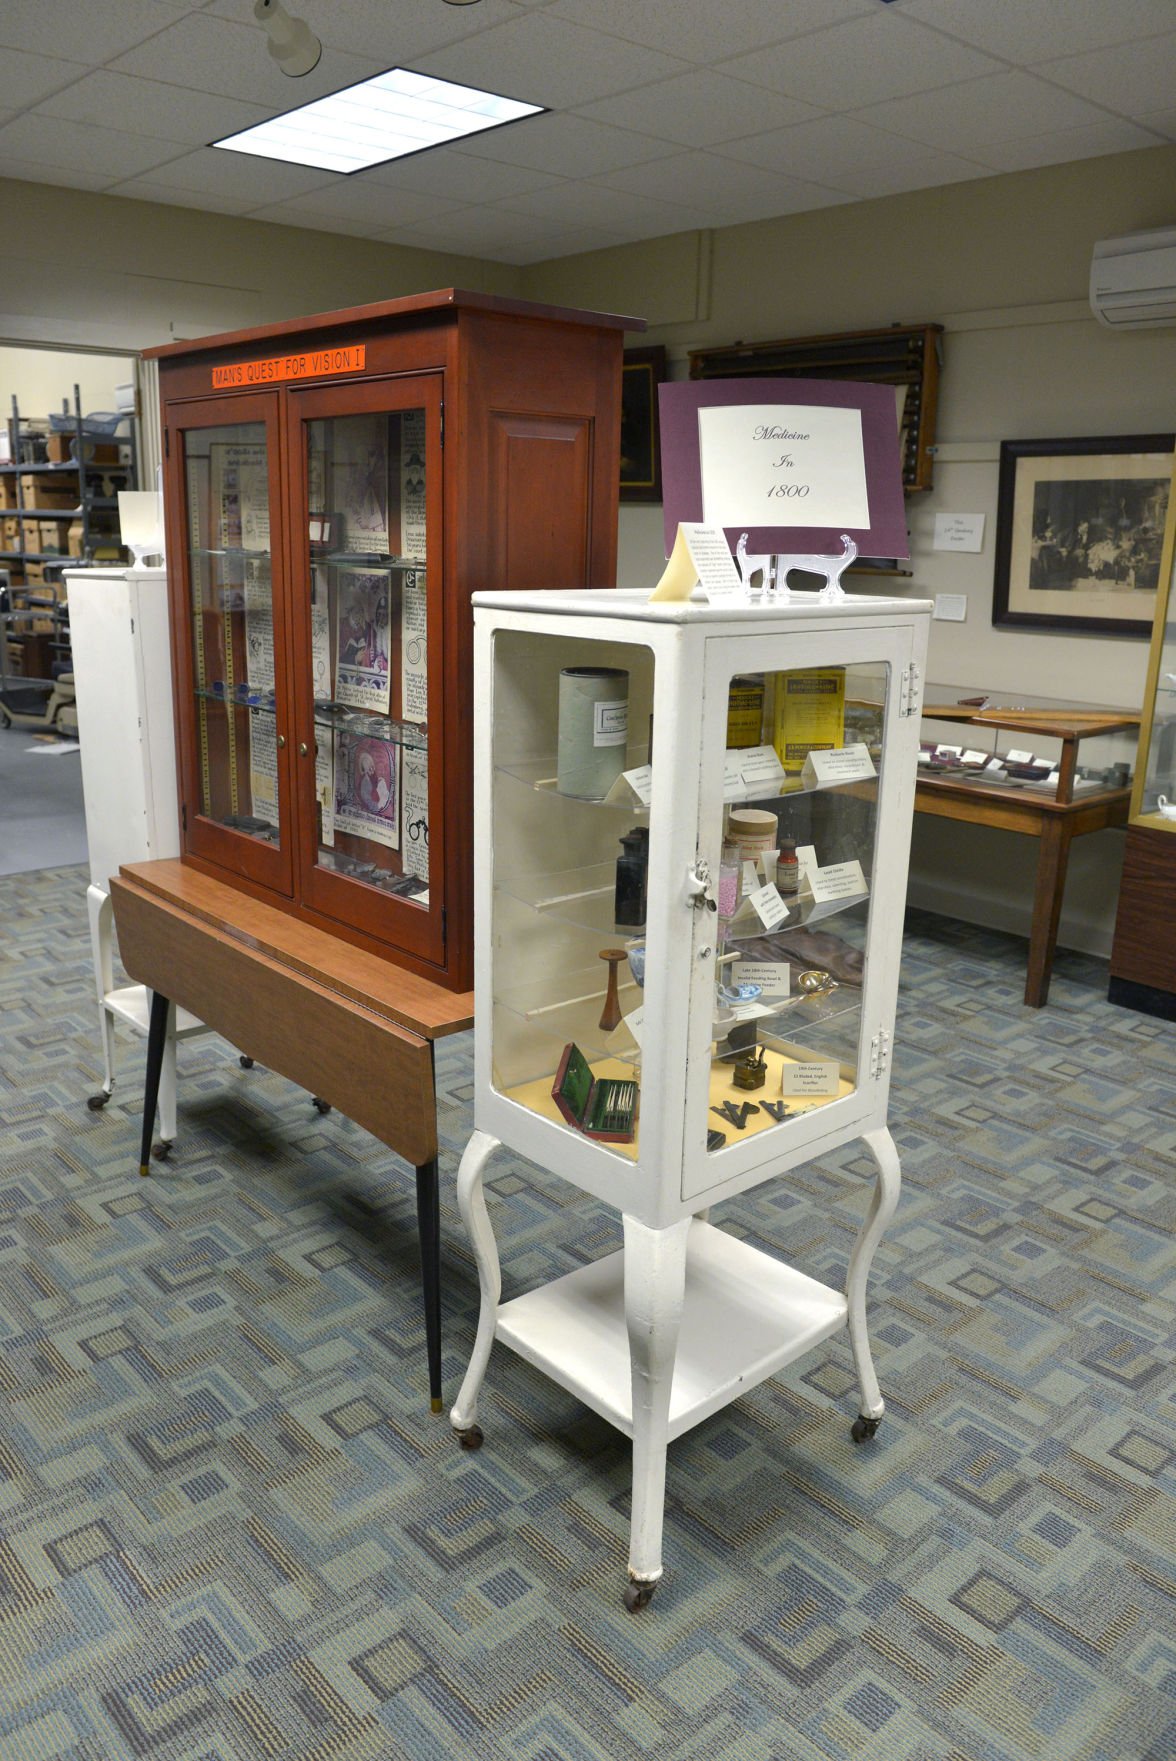 Medical museum tells the history of healing in Lancaster County | Trending ...